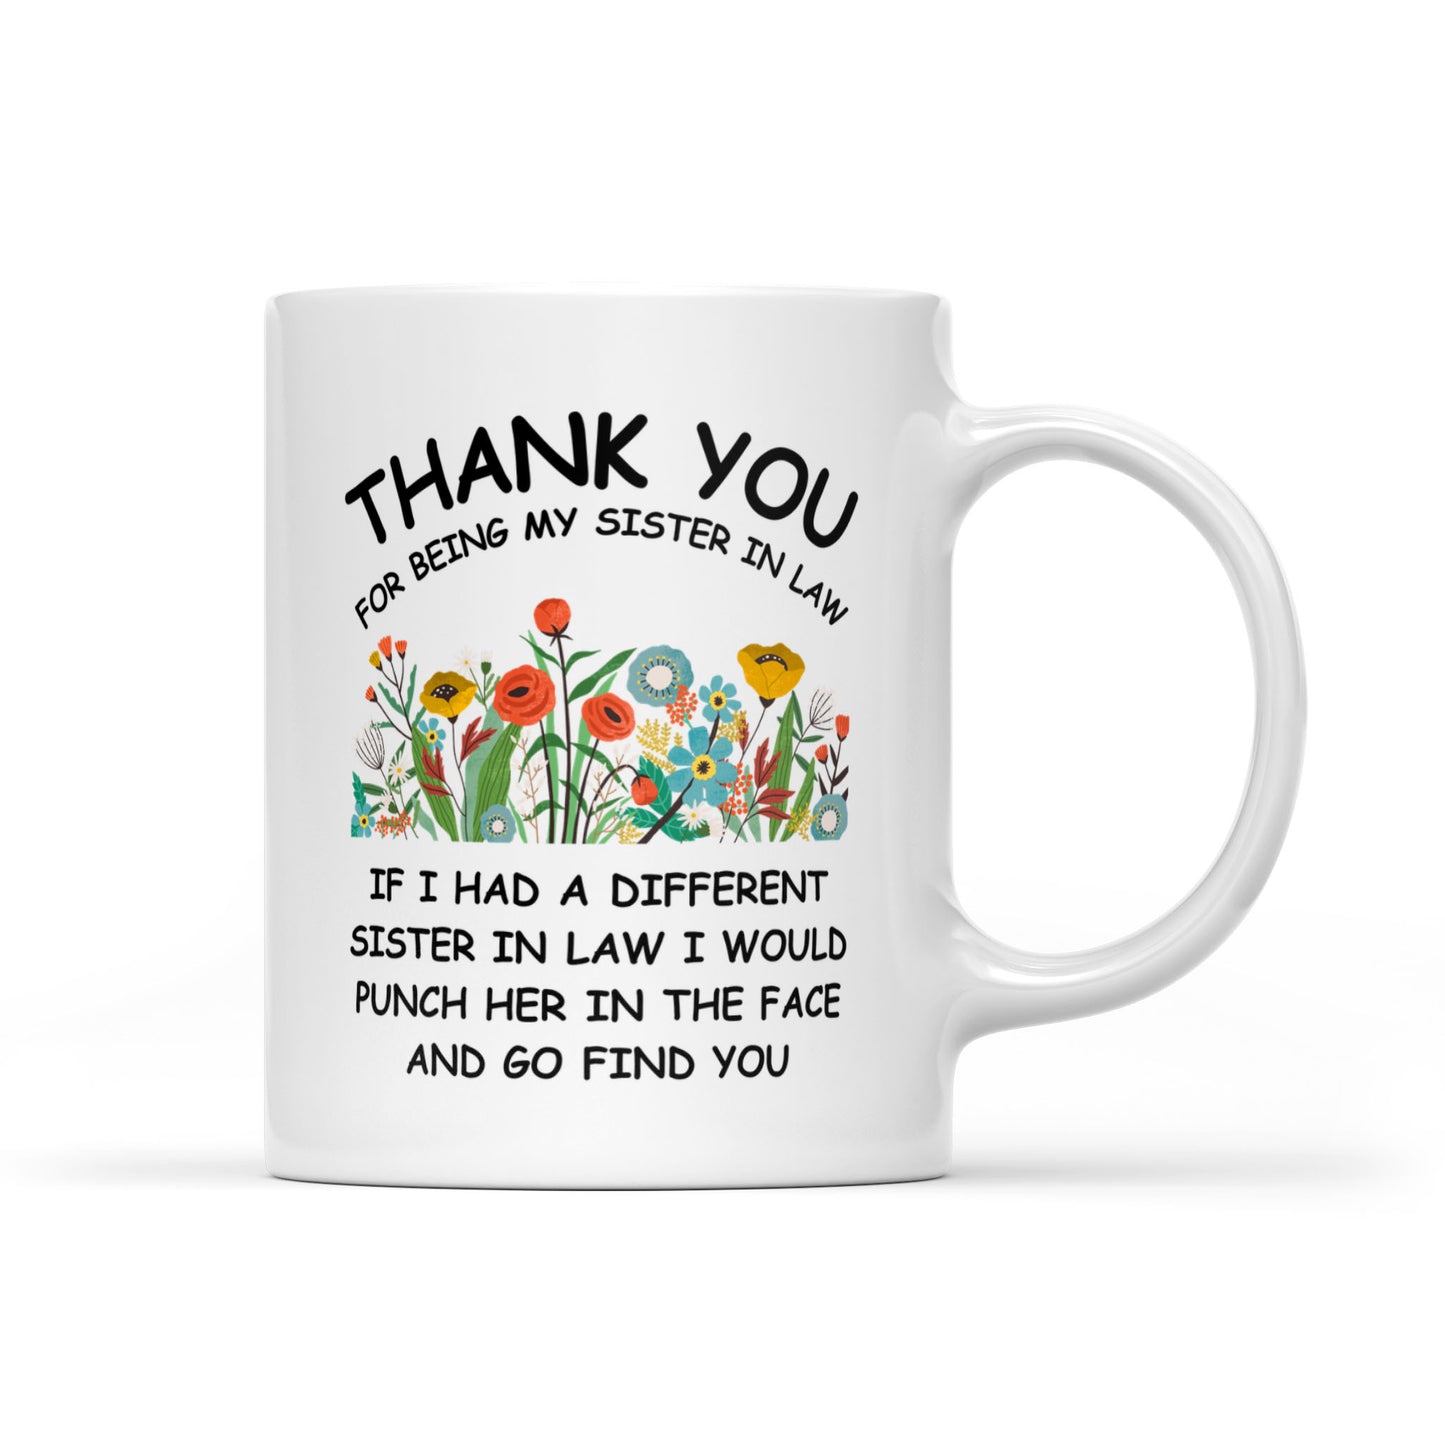 Thank You For Being My Sister In Law Mugs